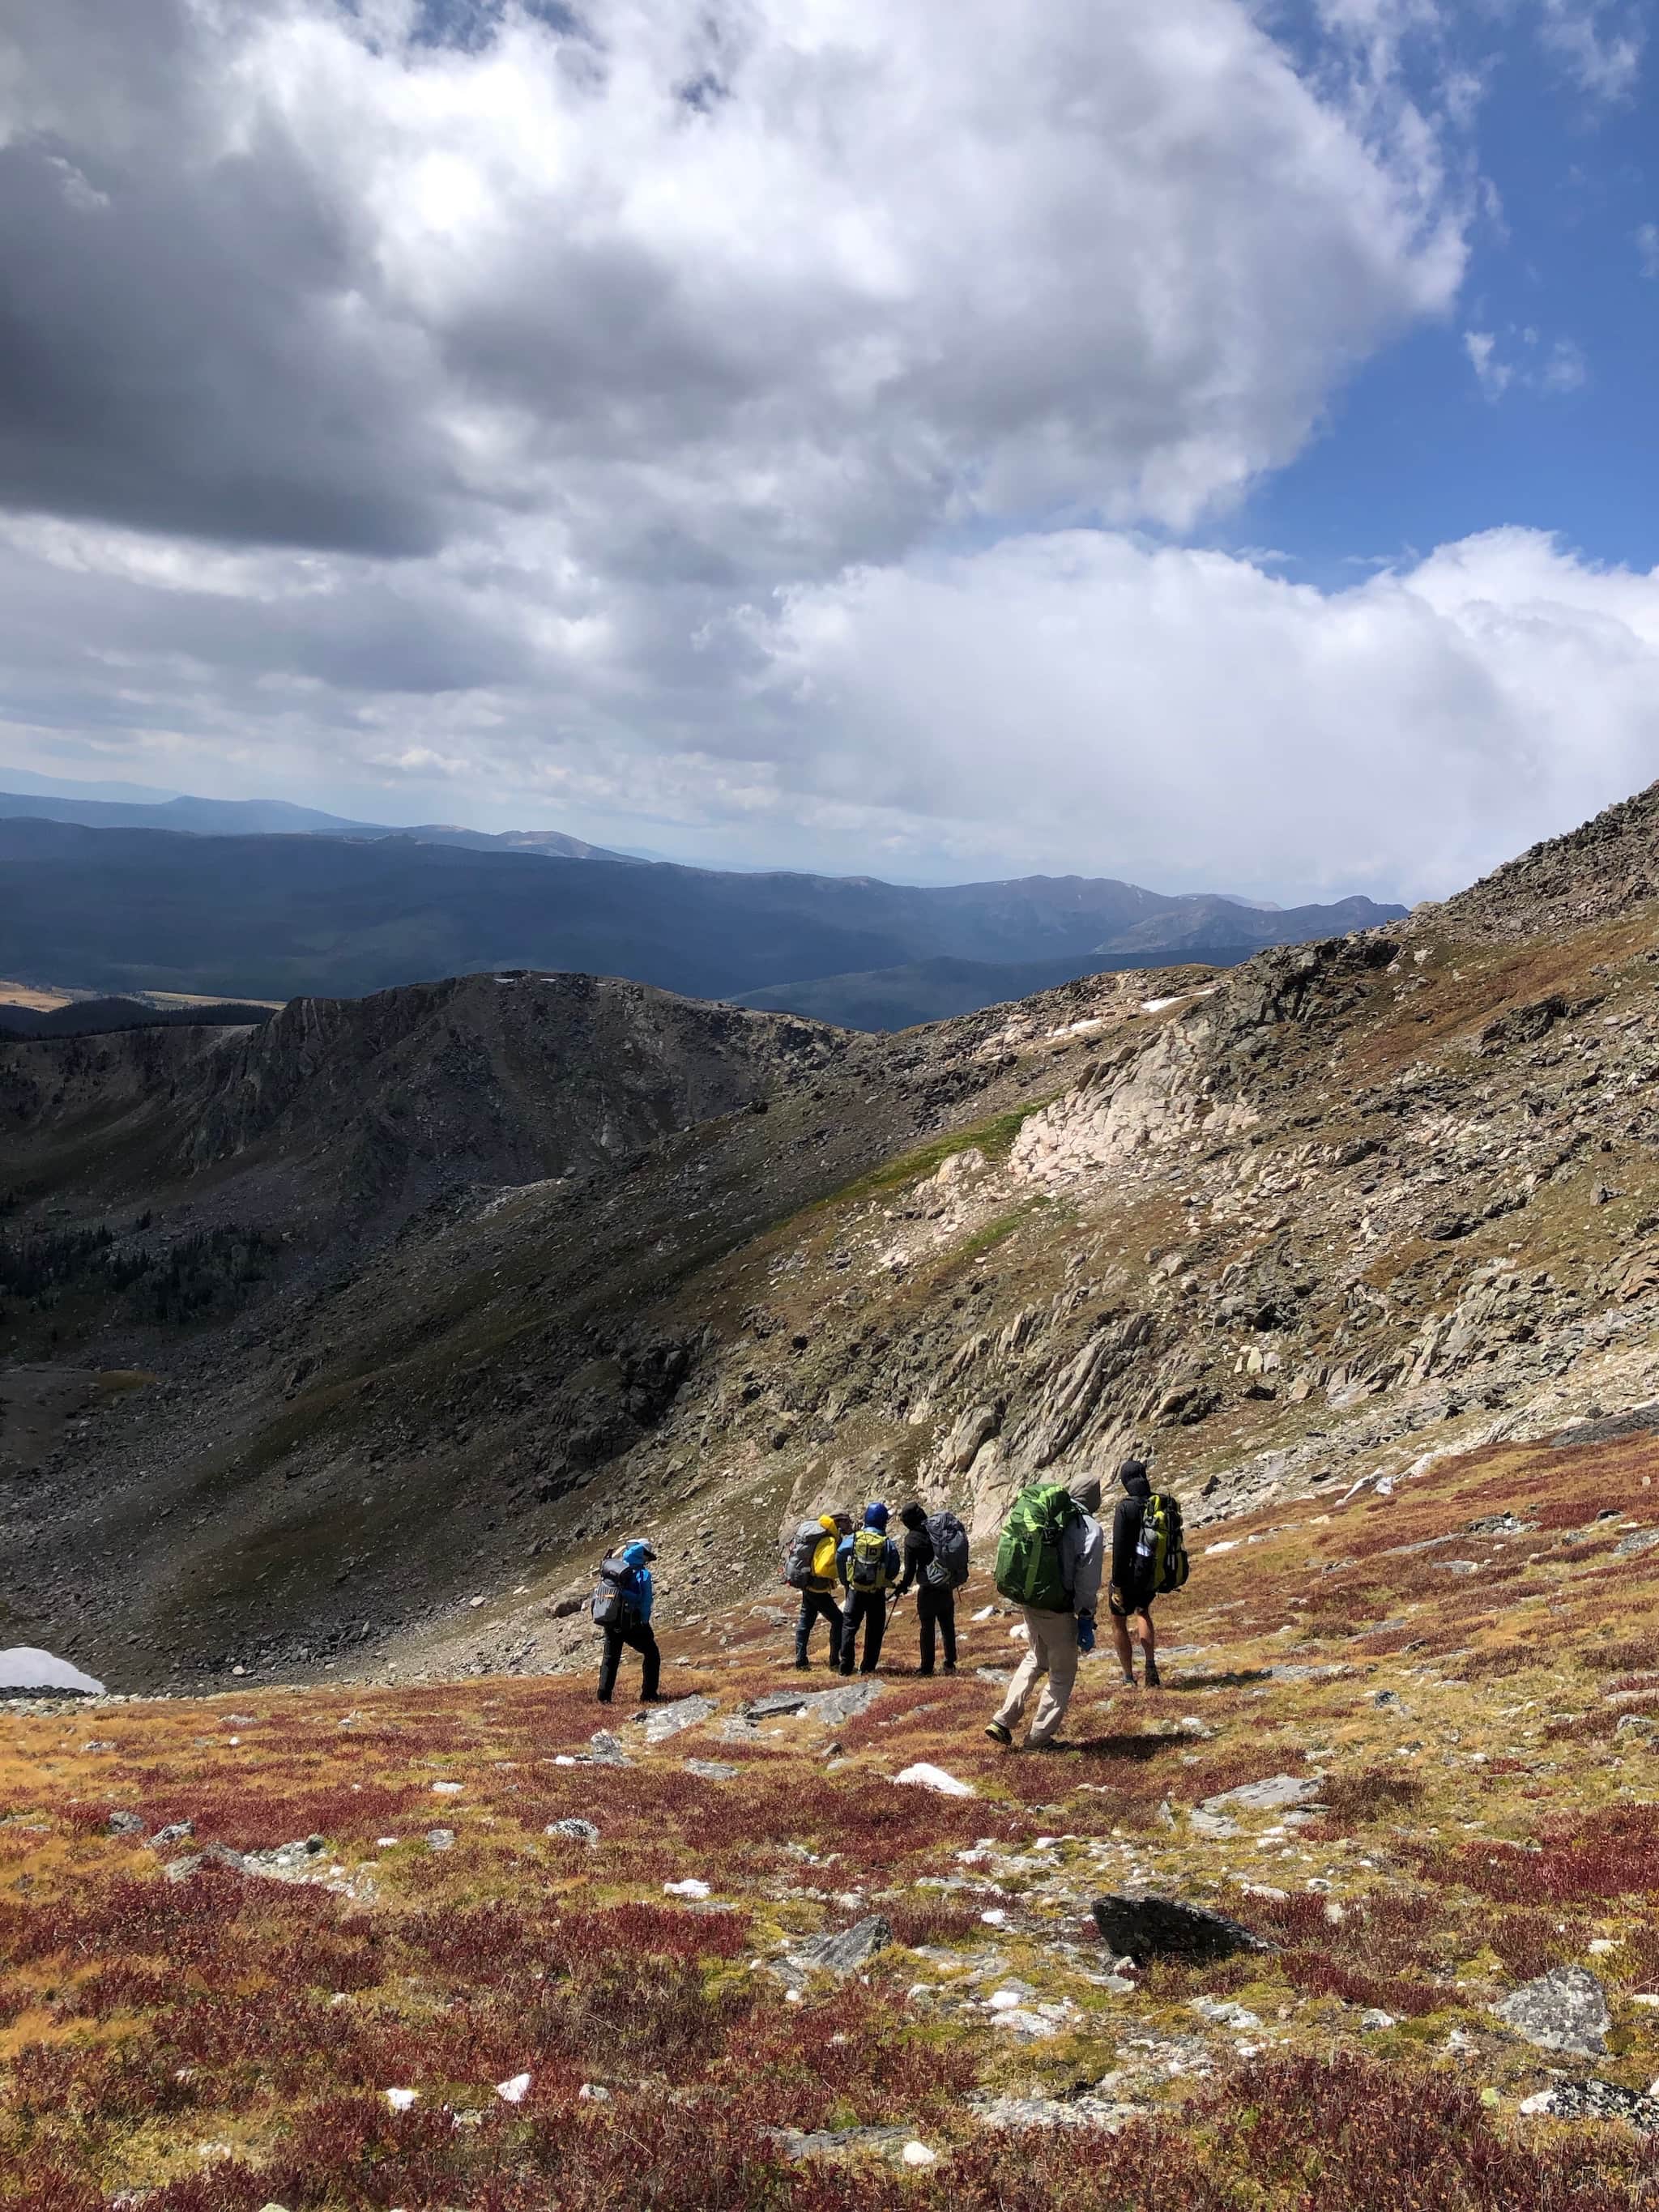 A group of hikers walking down steep tundra